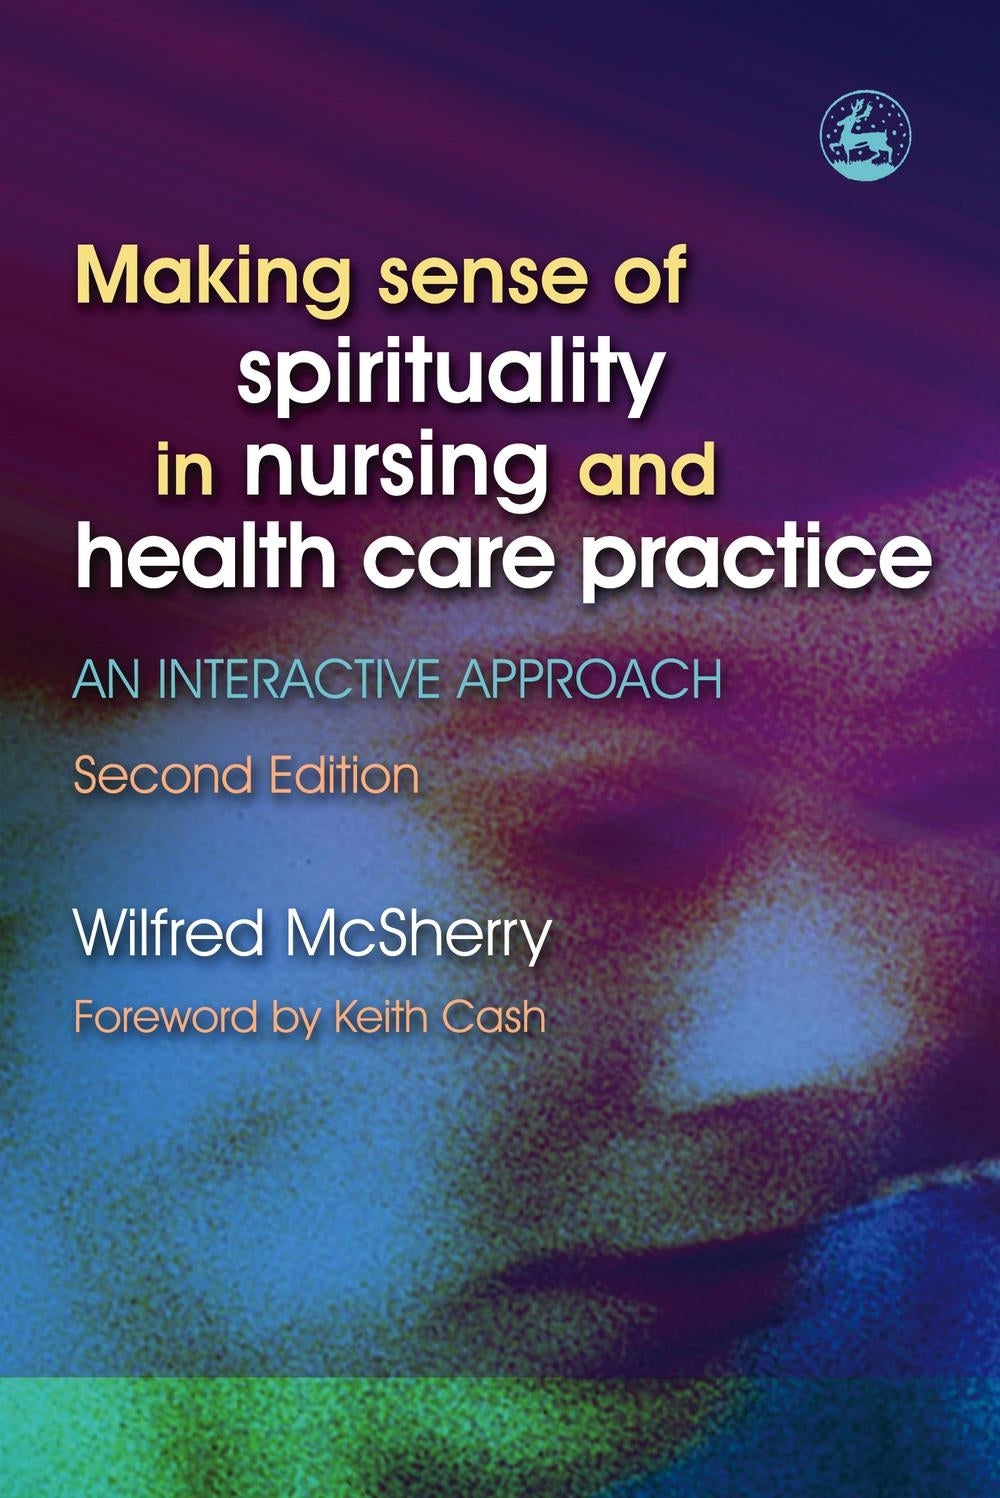 Making Sense of Spirituality in Nursing and Health Care Practice by Wilf McSherry